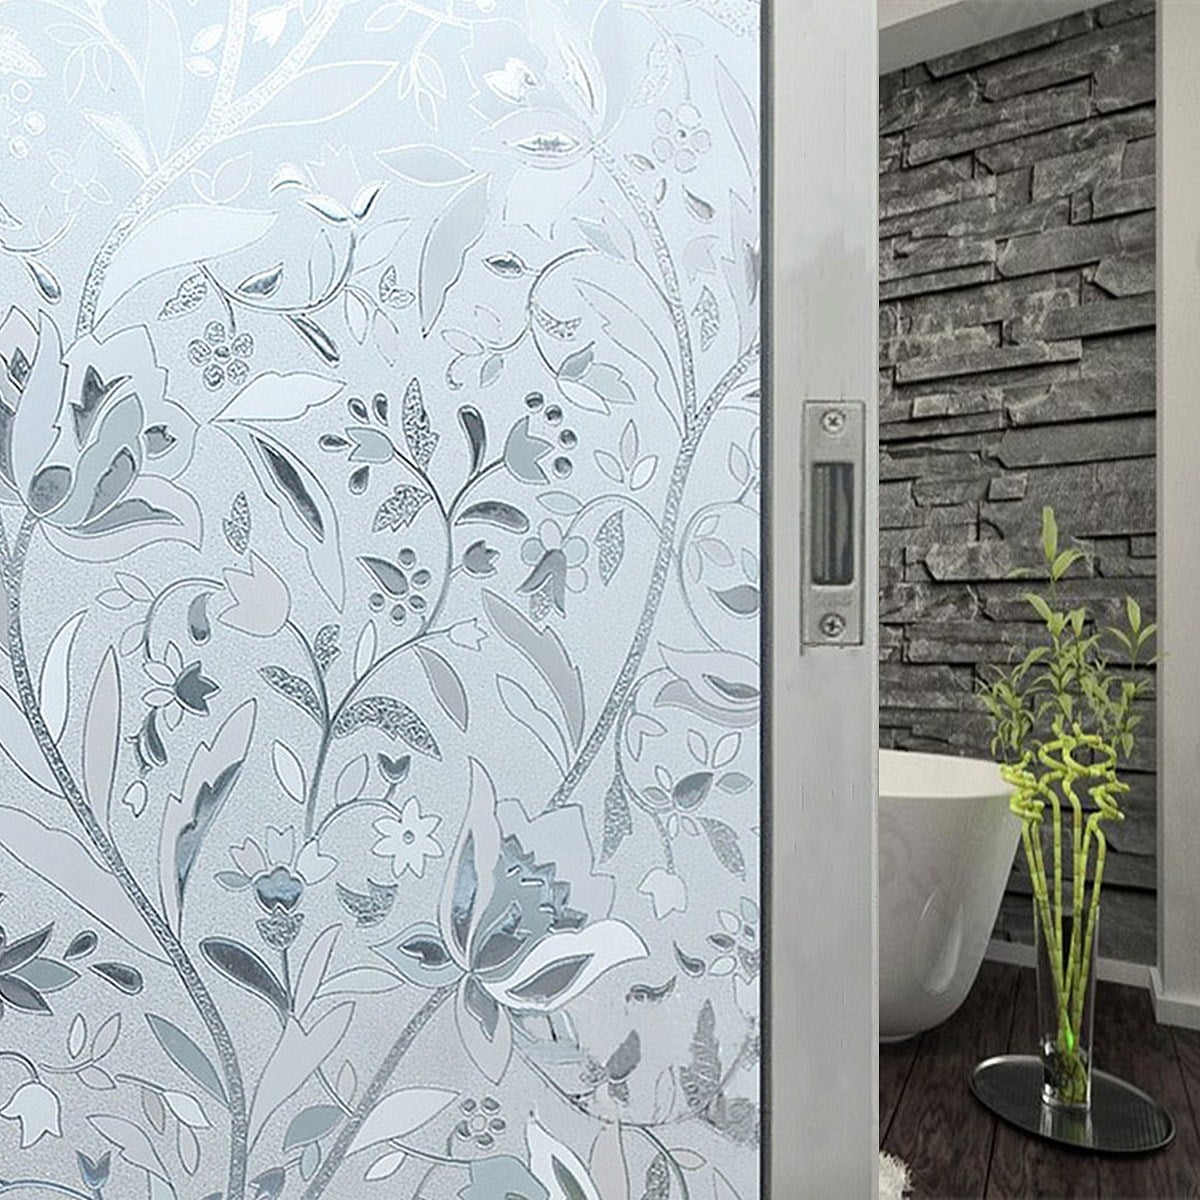 Snow Frosted Window Film Room Bathroom Home Window Film Tint Privacy Bath Office 